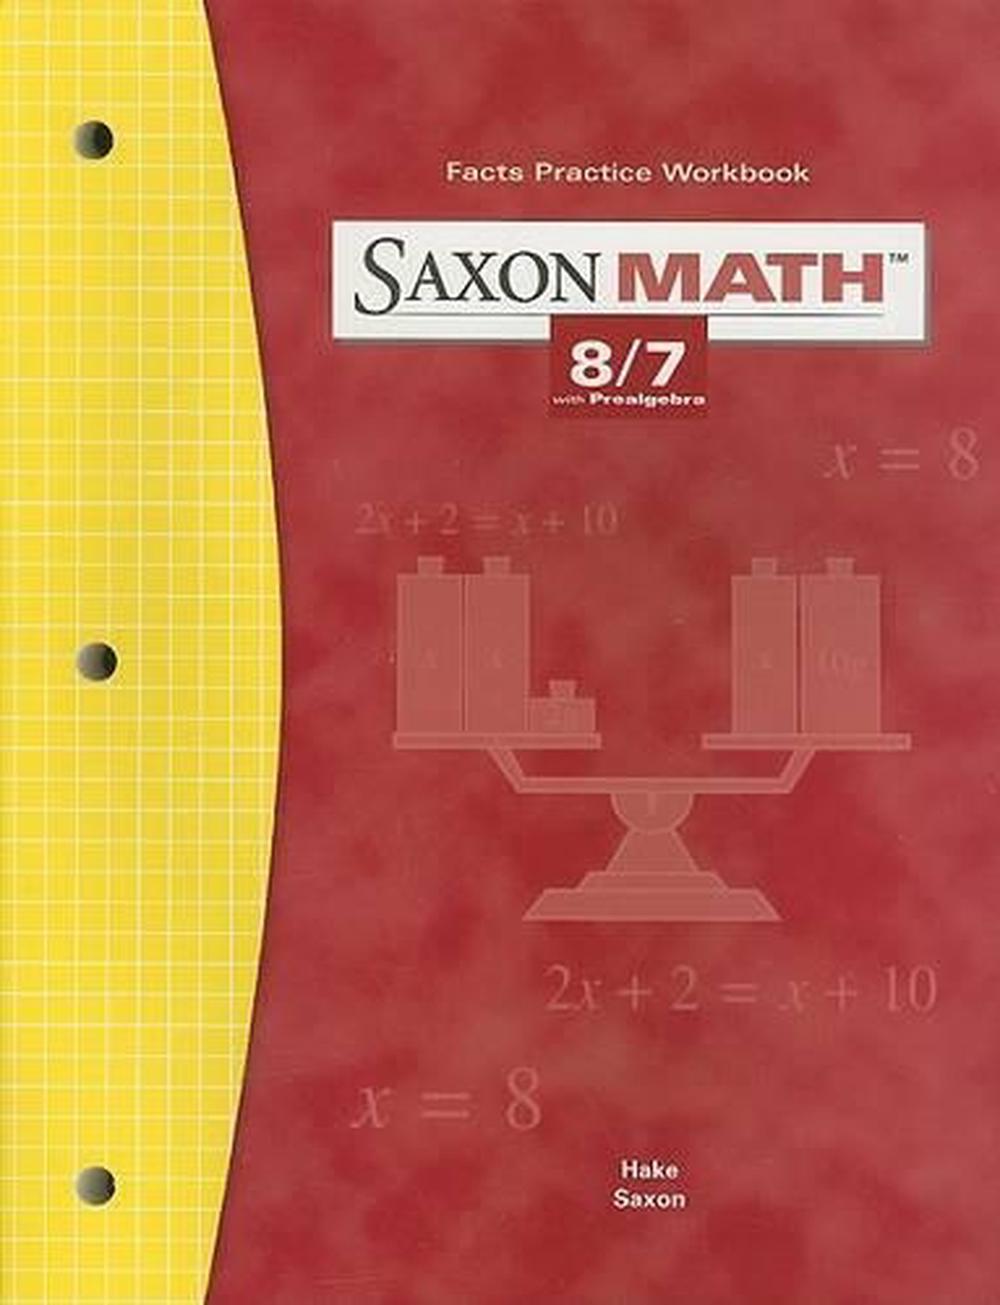 saxon-math-8-7-facts-practice-workbook-with-prealgebra-by-stephen-hake